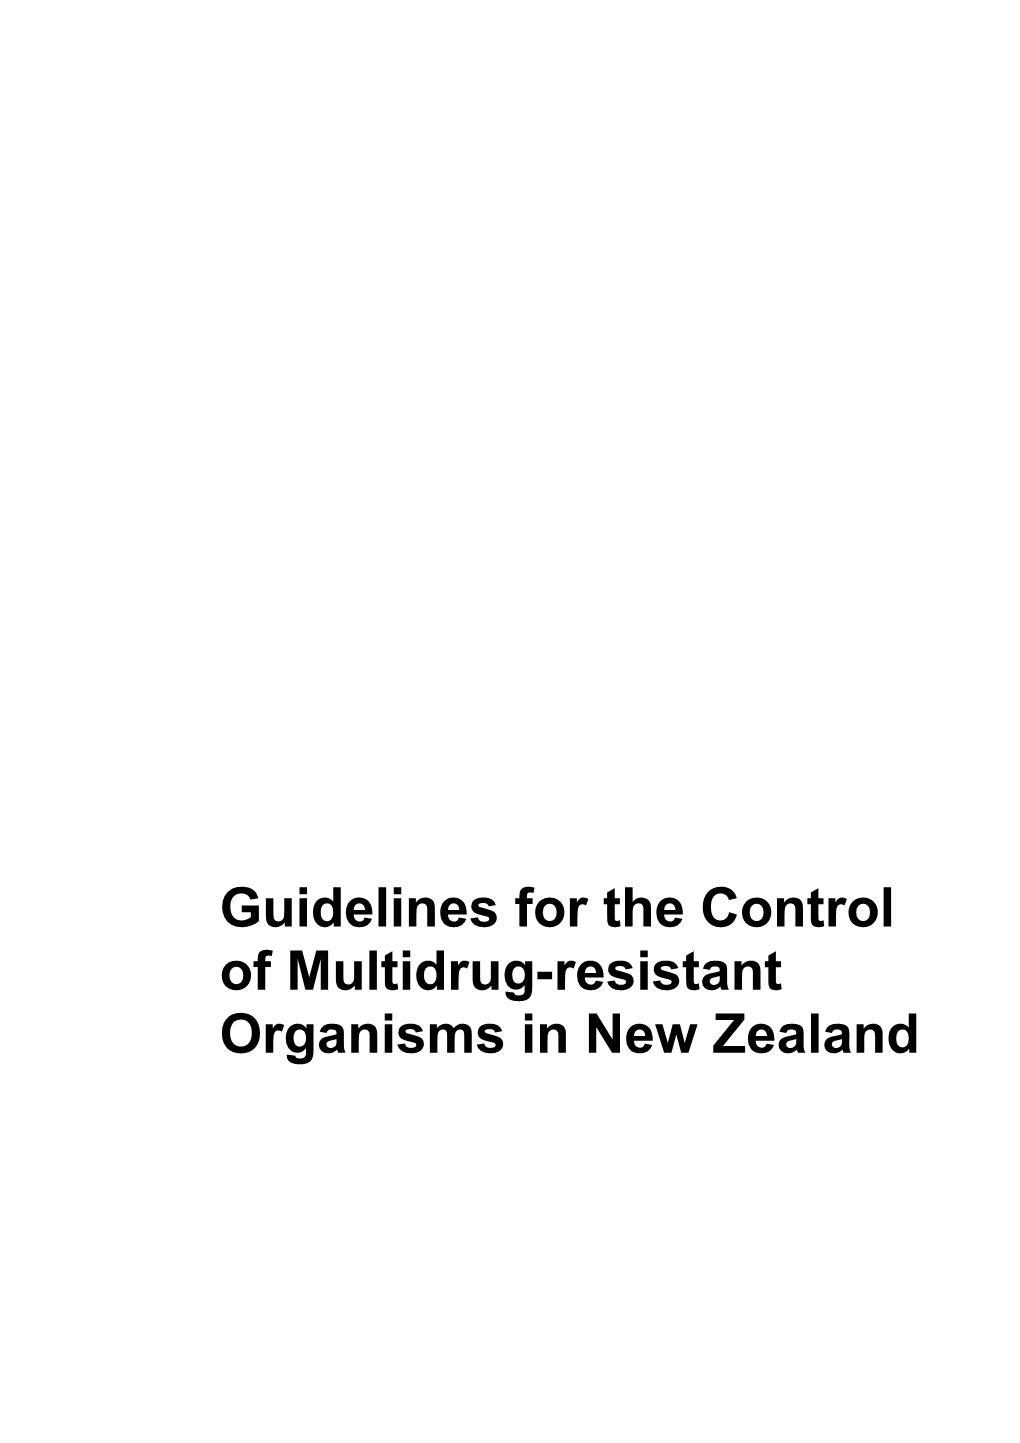 Guidelines for the Control of Multidrug-Resistant Organisms in New Zealand